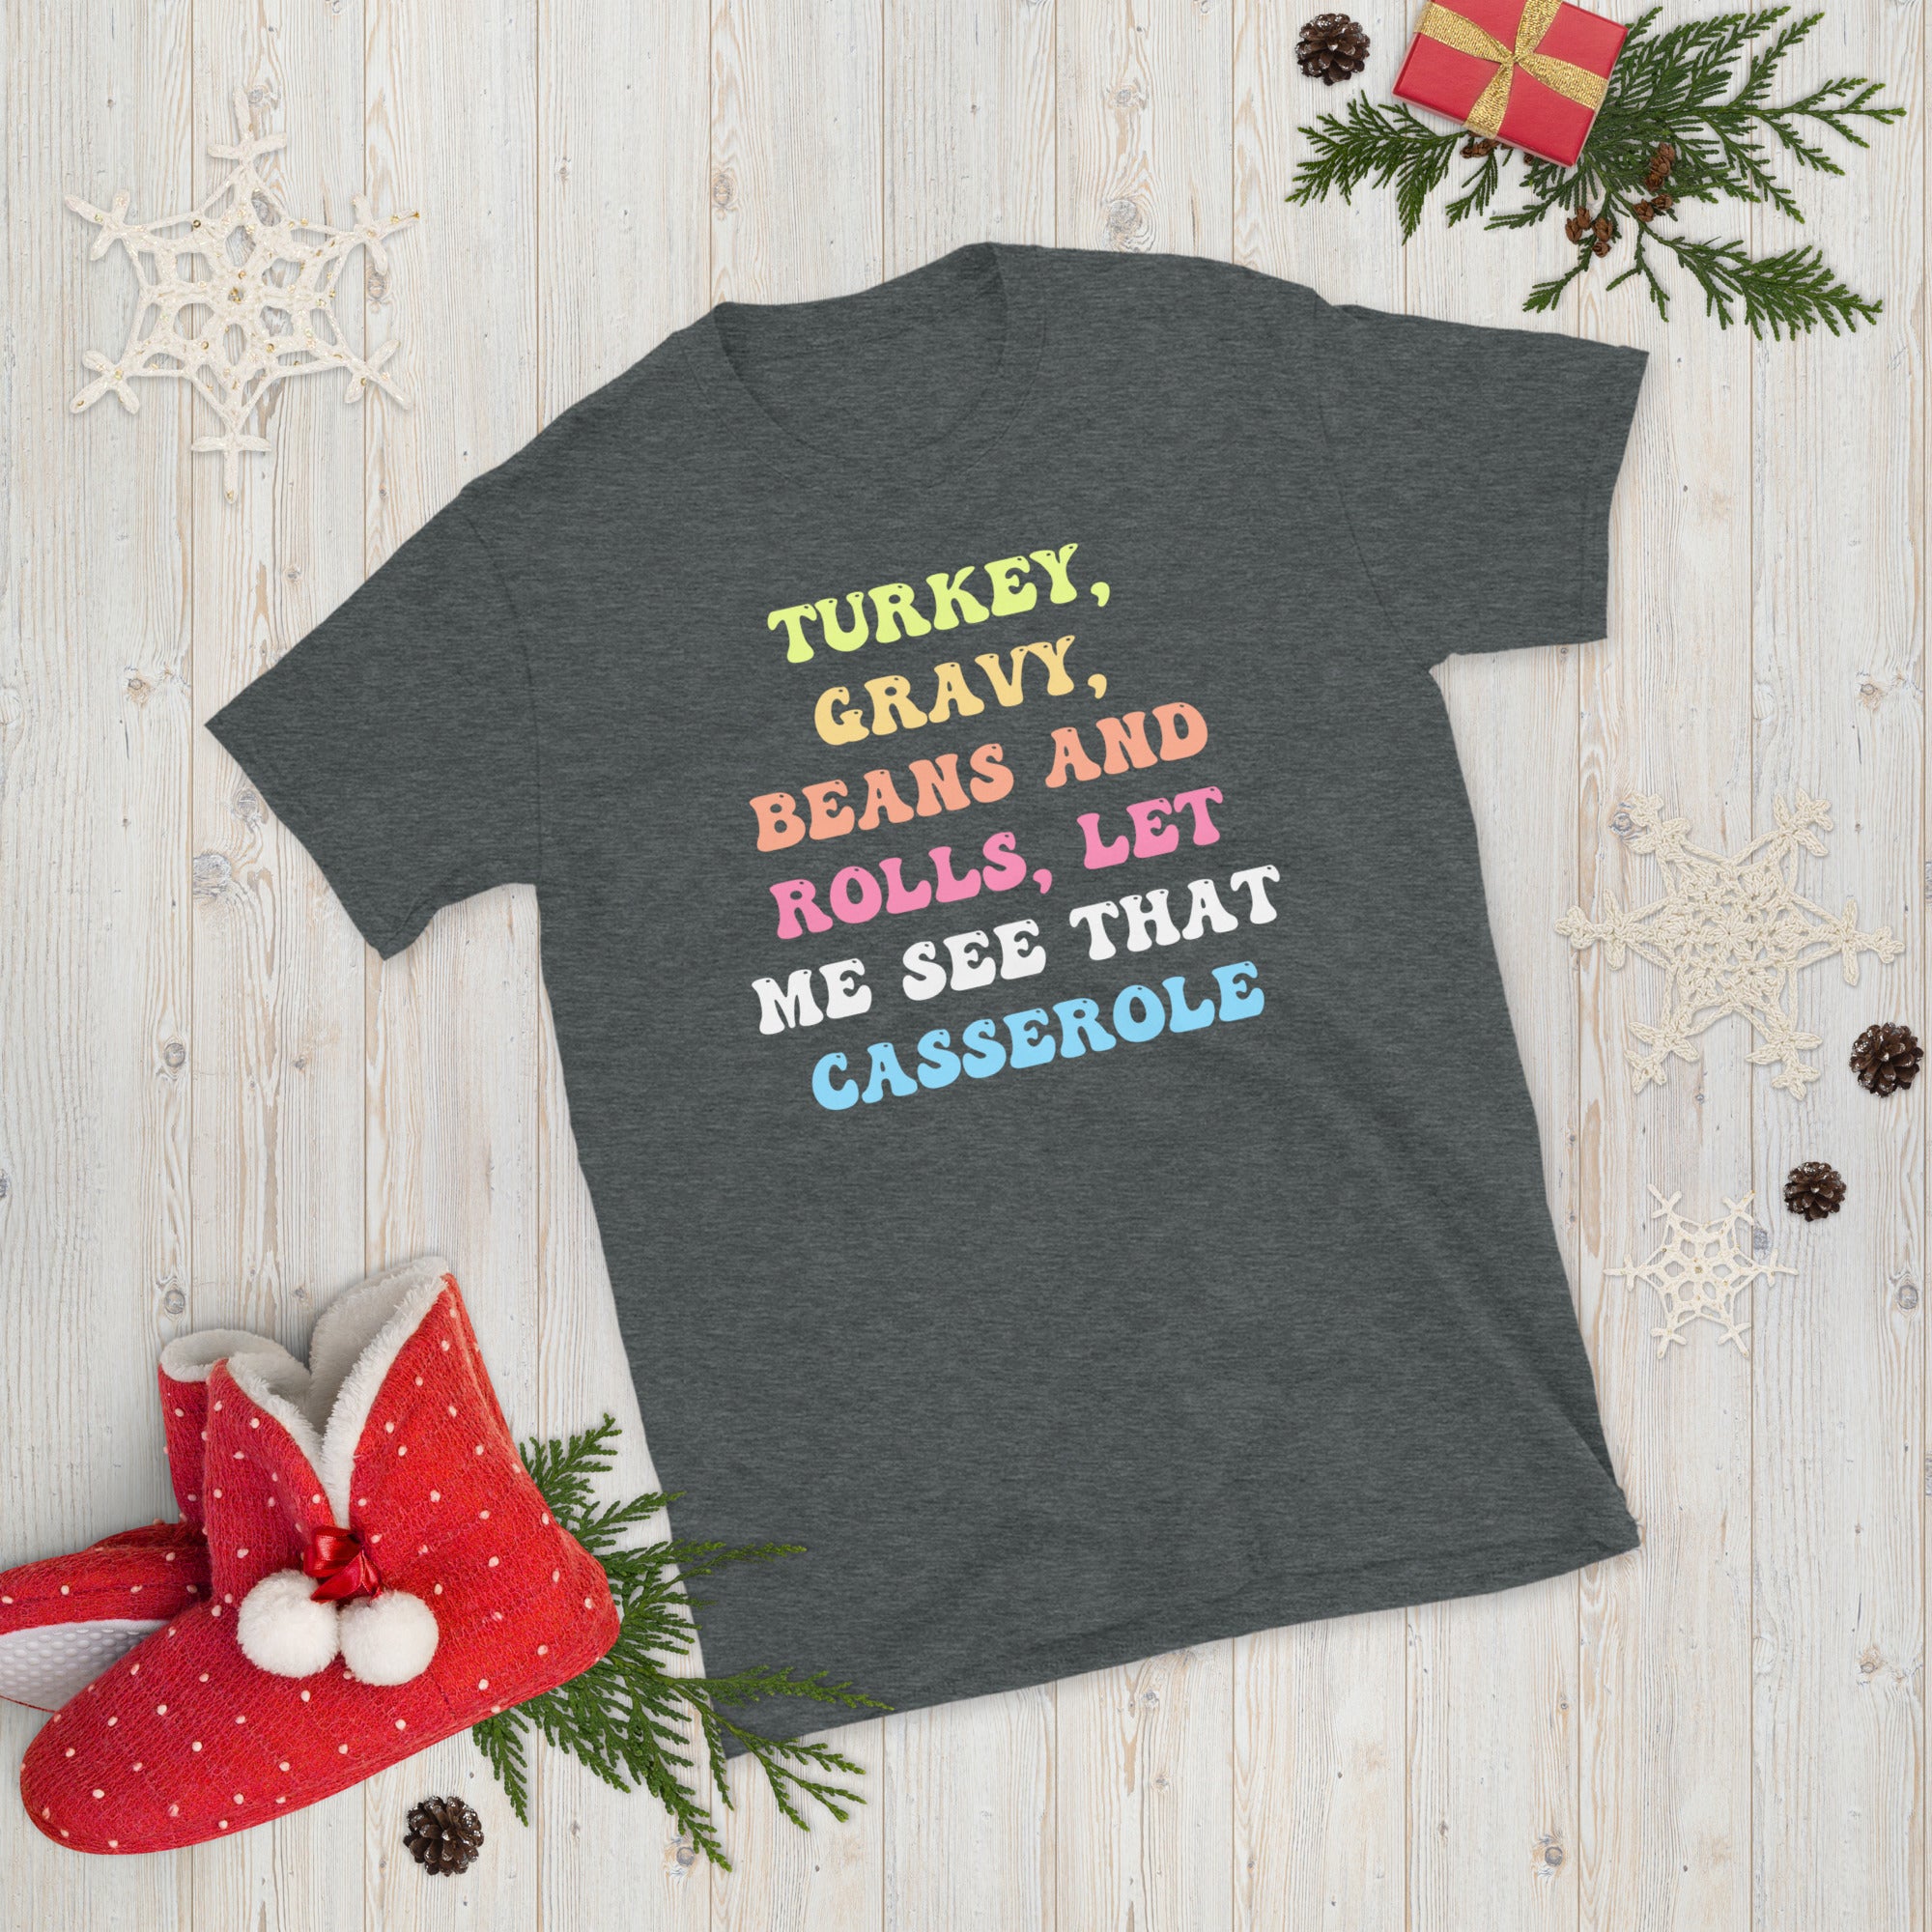 Turkey Gravy Beans And Rolls Let Me See That Casserole, Thanksgiving Funny Shirt, Turkey Lover Groovy TShirt, Family Thanksgiving Gift Tee - Madeinsea©